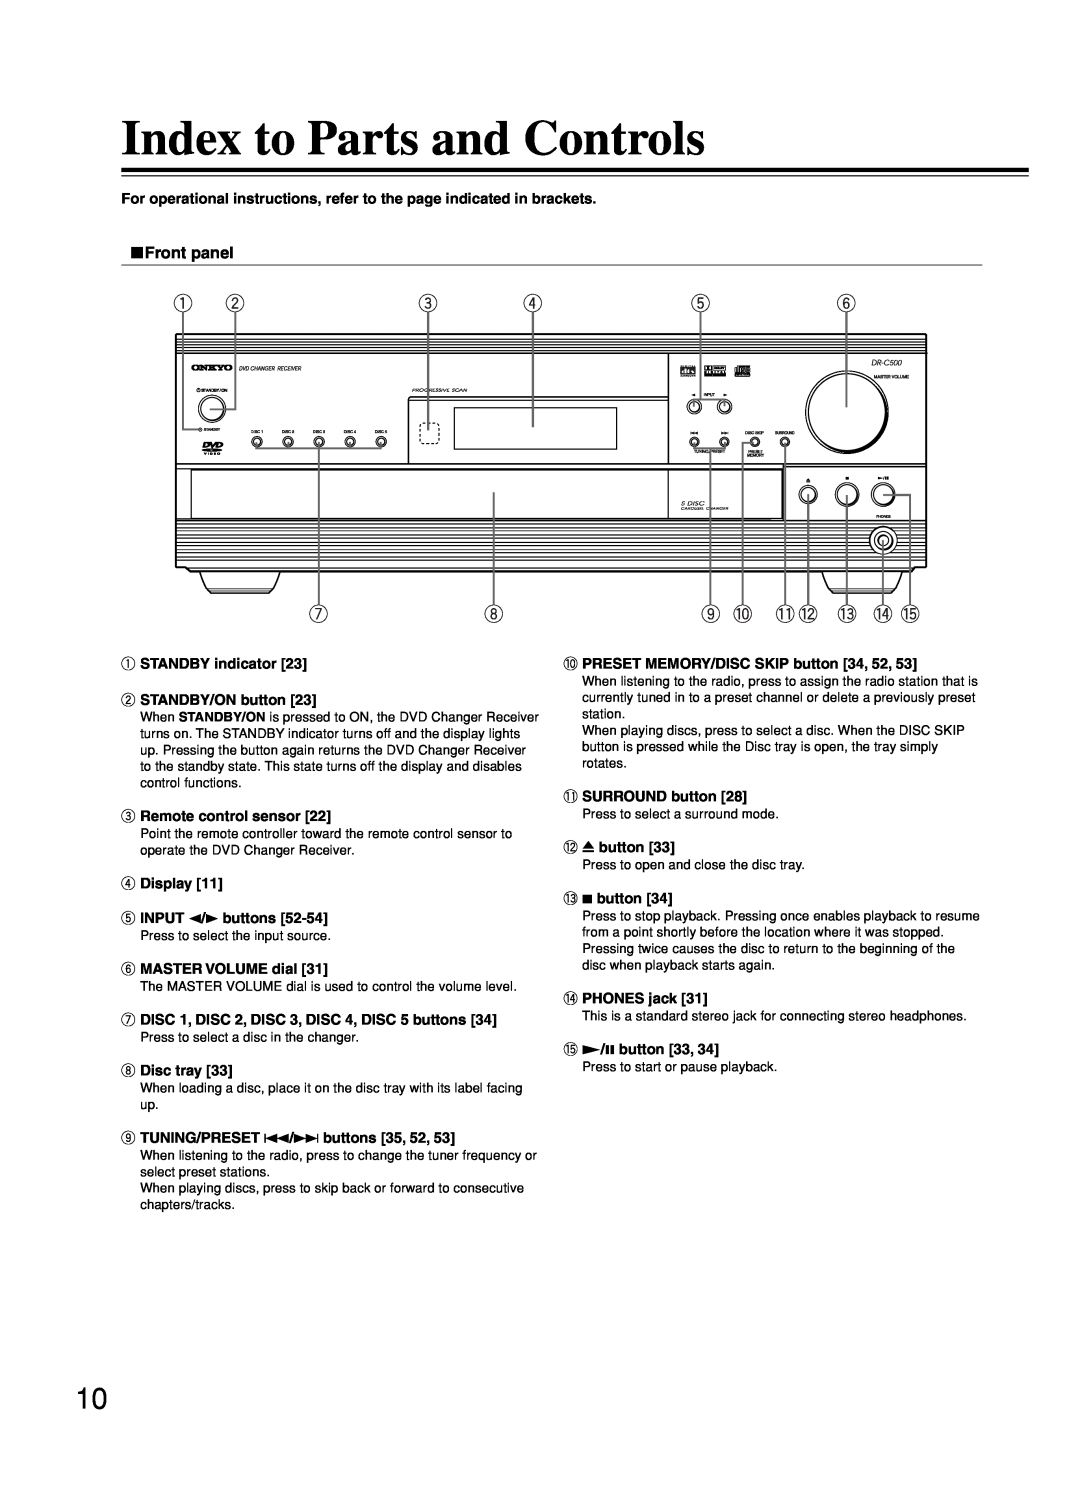 Onkyo DR-C500 instruction manual Index to Parts and Controls 